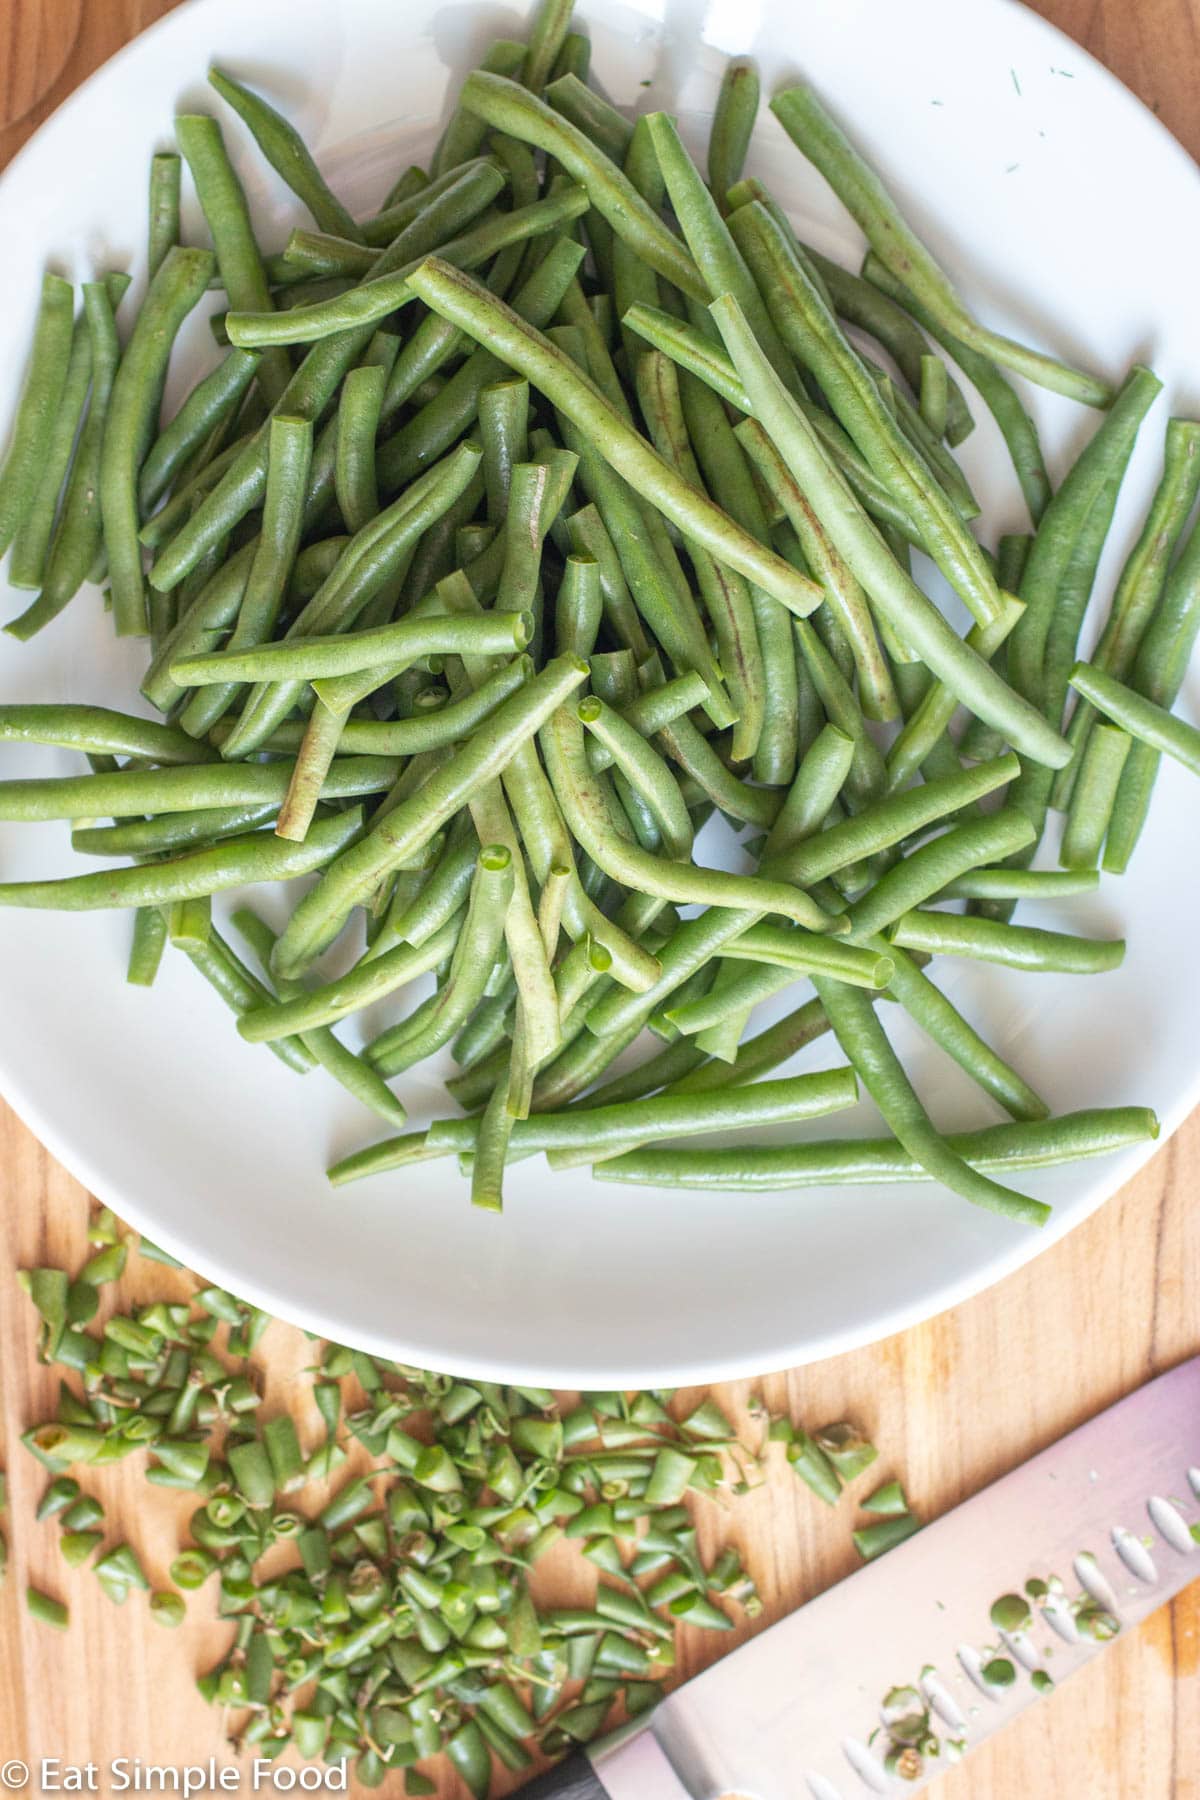 Top view of white plate of green beans with the ends cut off and laying on a wood cutting board with a chef's knife.